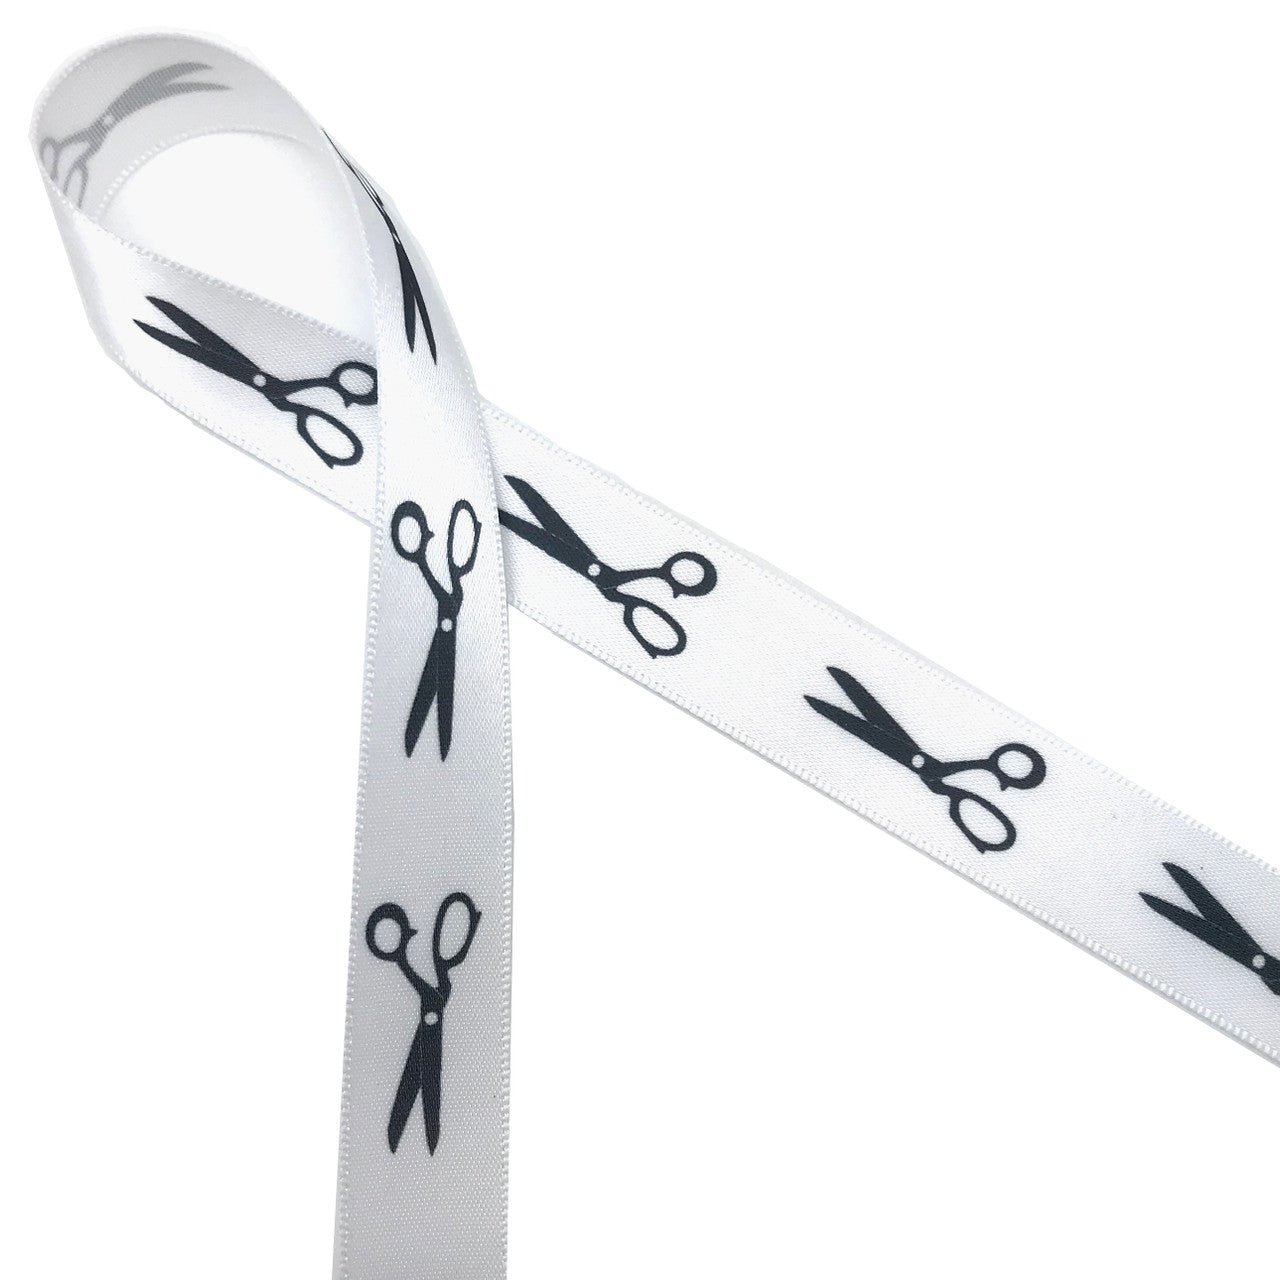 Scissors in black silhouette printed on 5/8" white single face satin ribbon is an ideal way to tie gifts and favors for your hair stylists or sewing skilled friends!